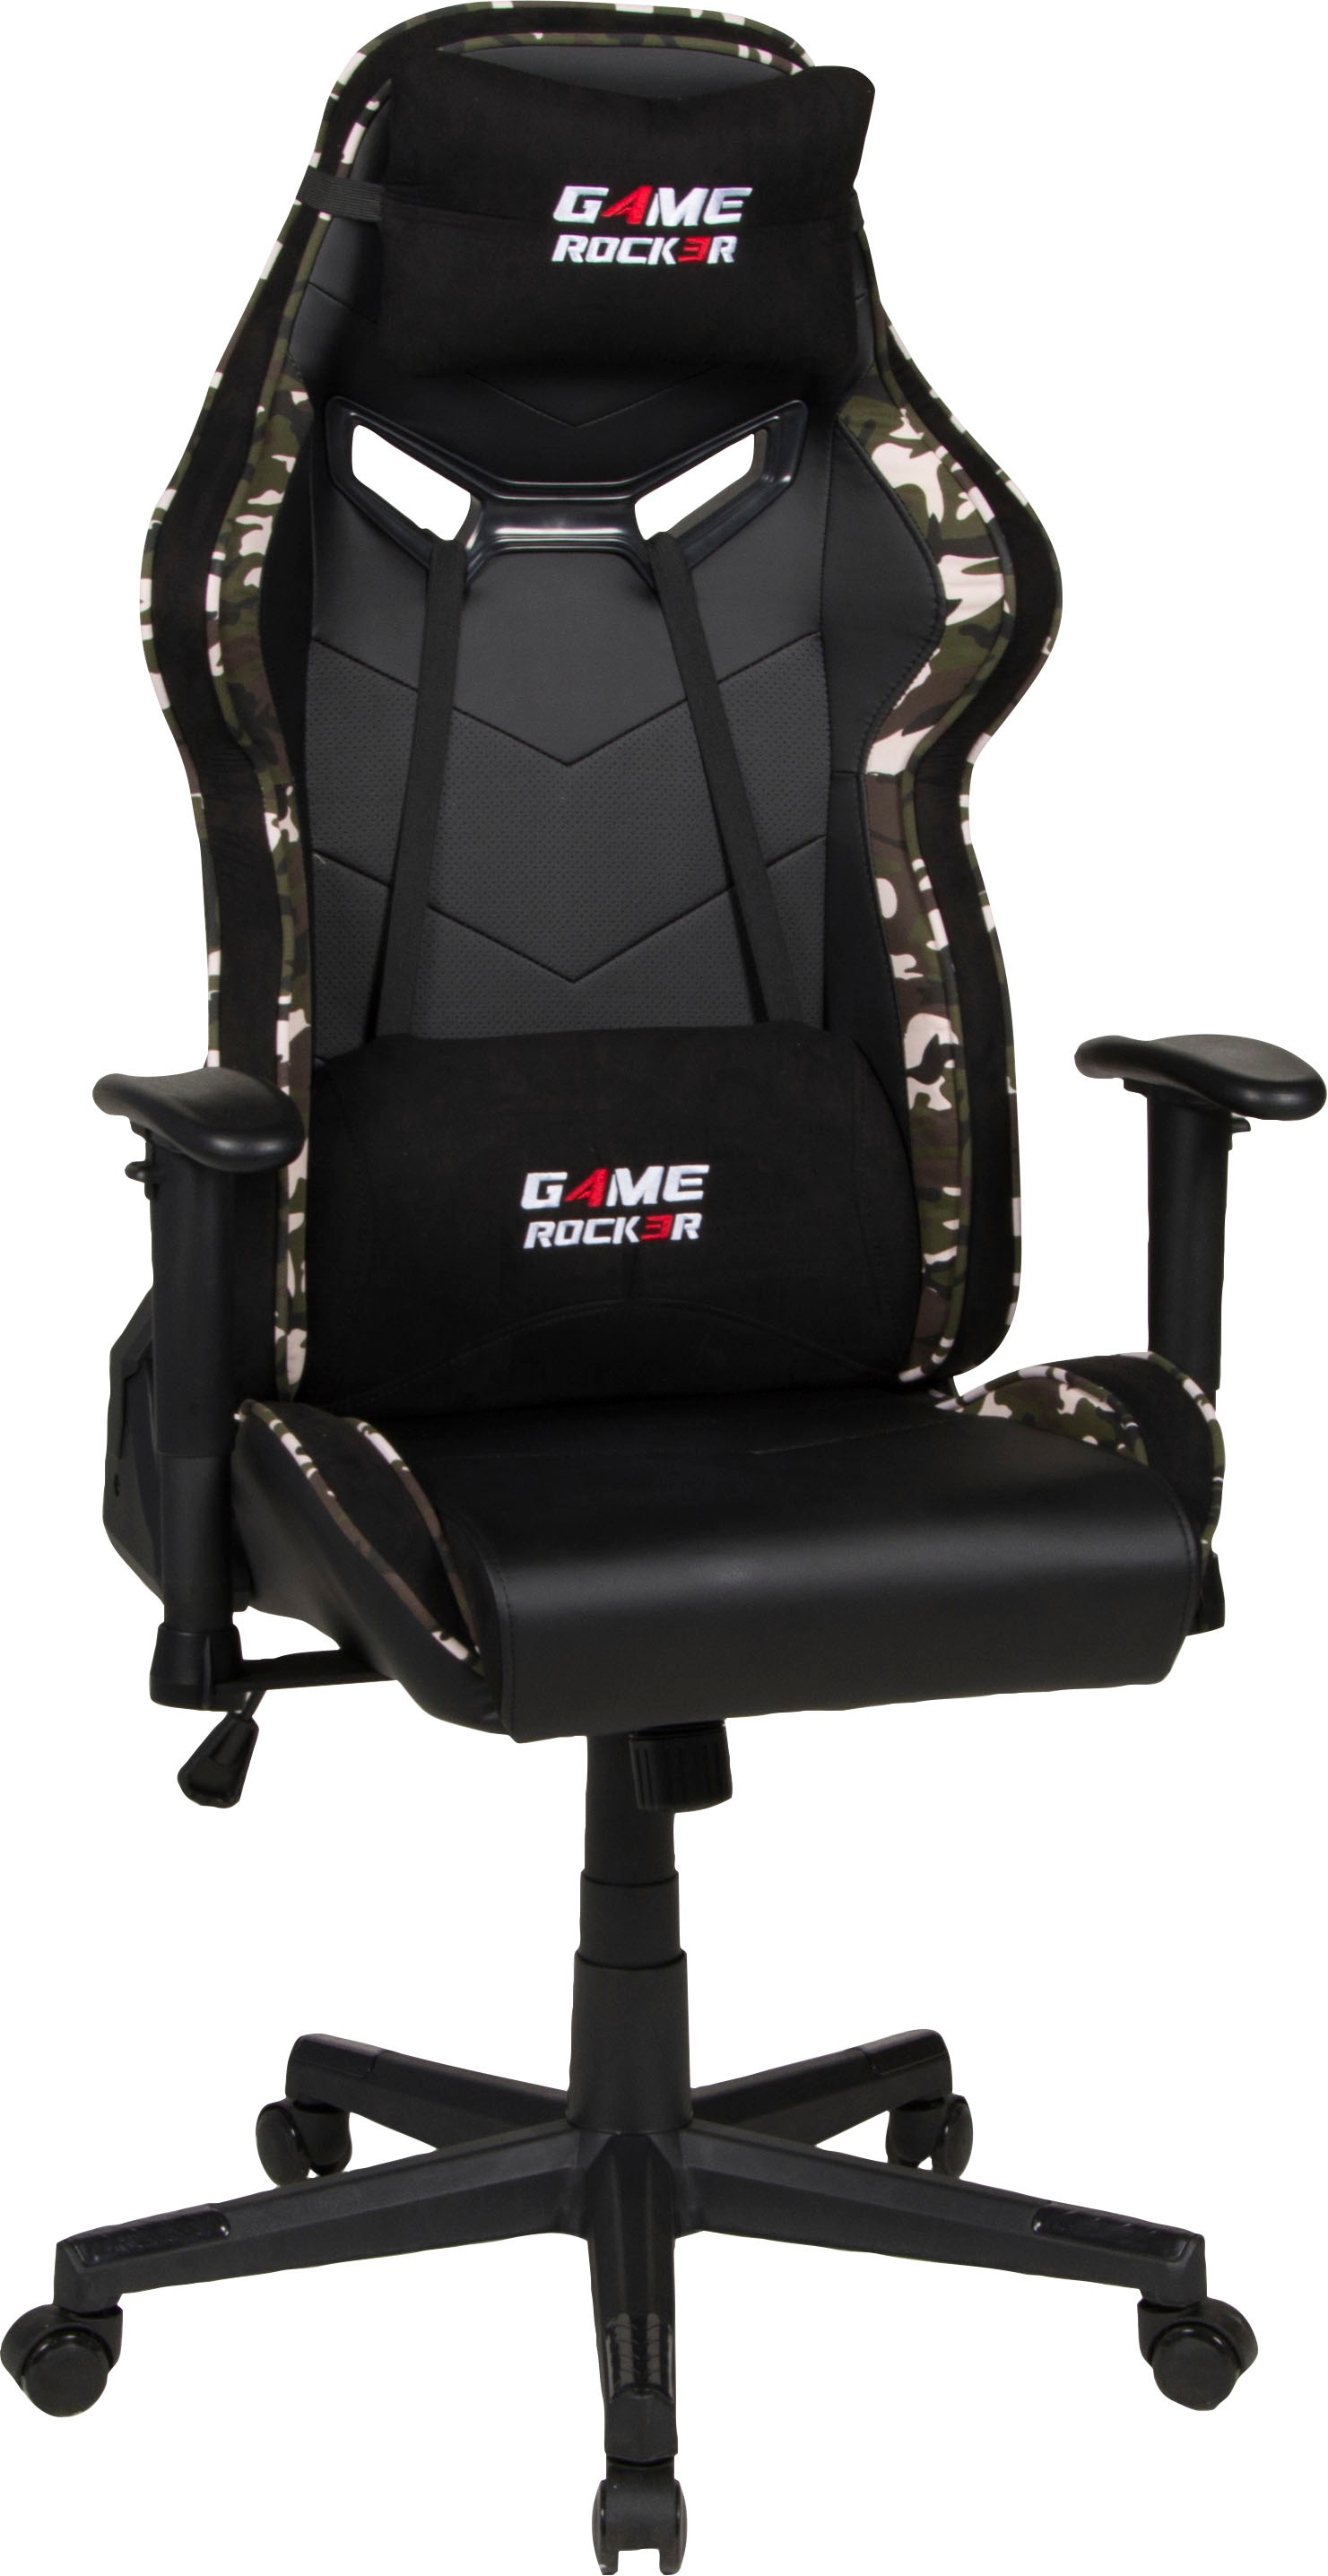 Duo Collection Chefsessel "Game-Rocker G-30", Kunstleder-Stoff-Microfaser, Gaming Chair in Camouflage Optik